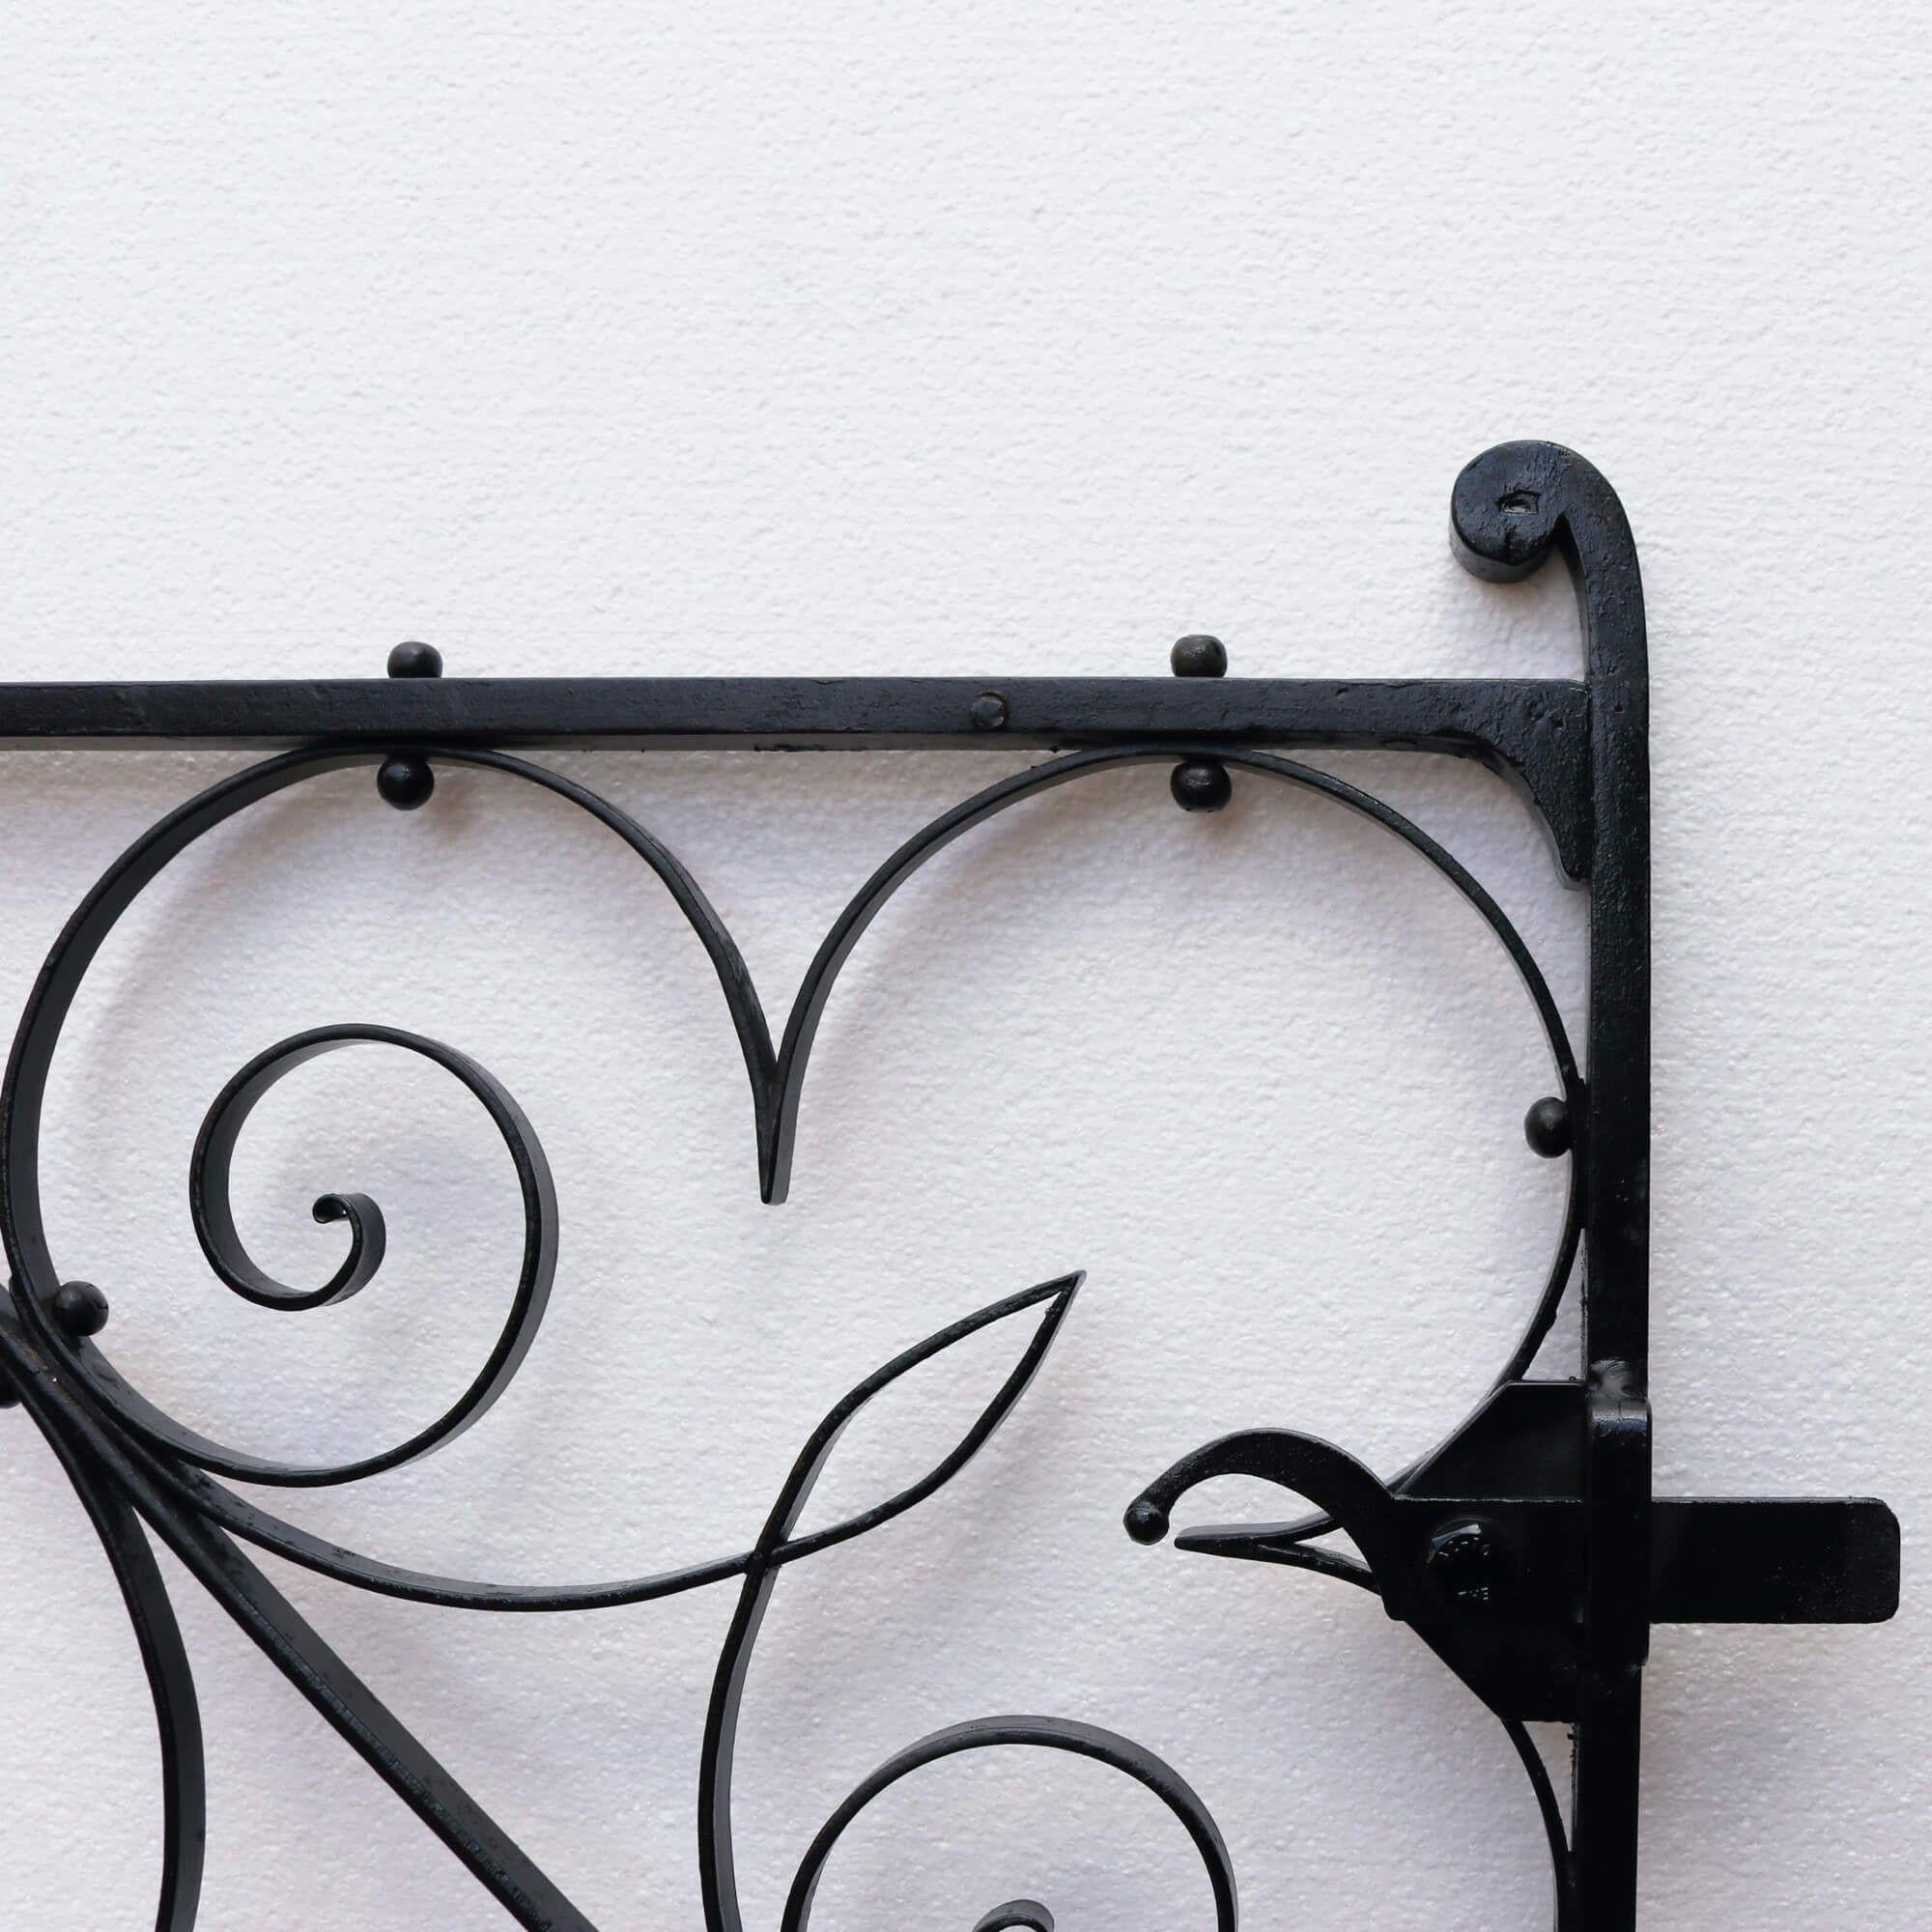 English Scrollwork Wrought Iron Garden Gate For Sale